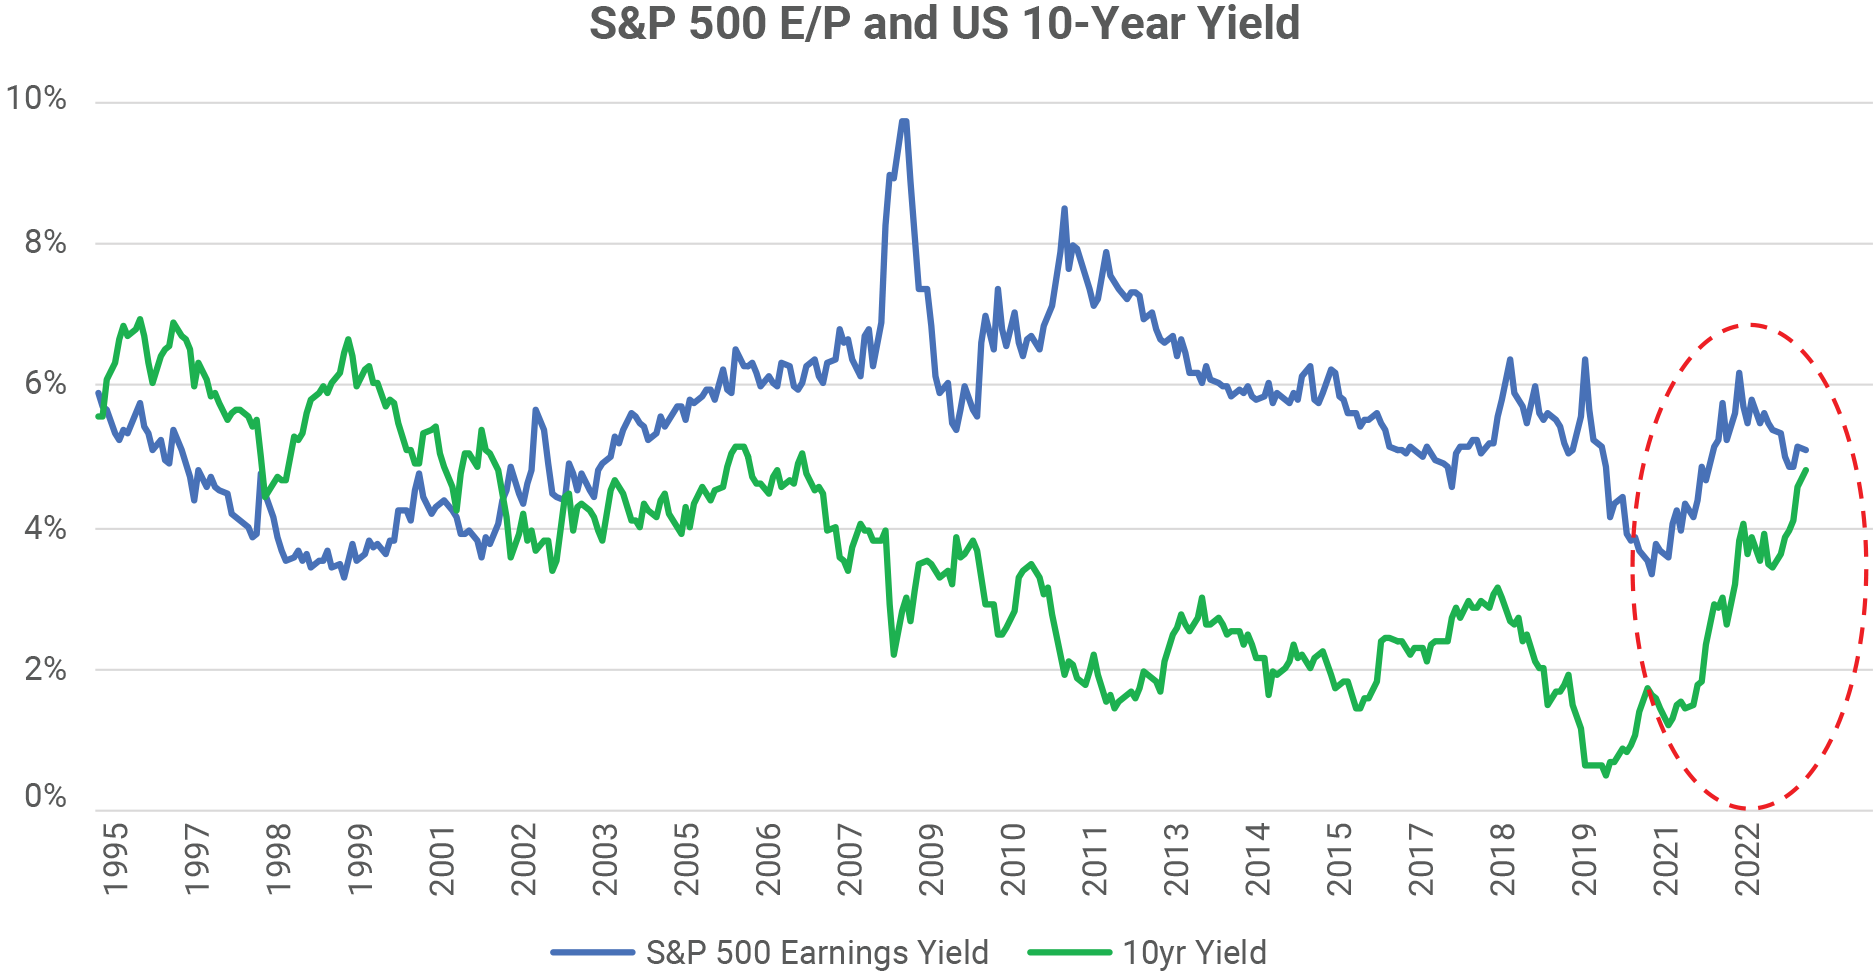 S&P 500 E/P and US 10-Year Yield